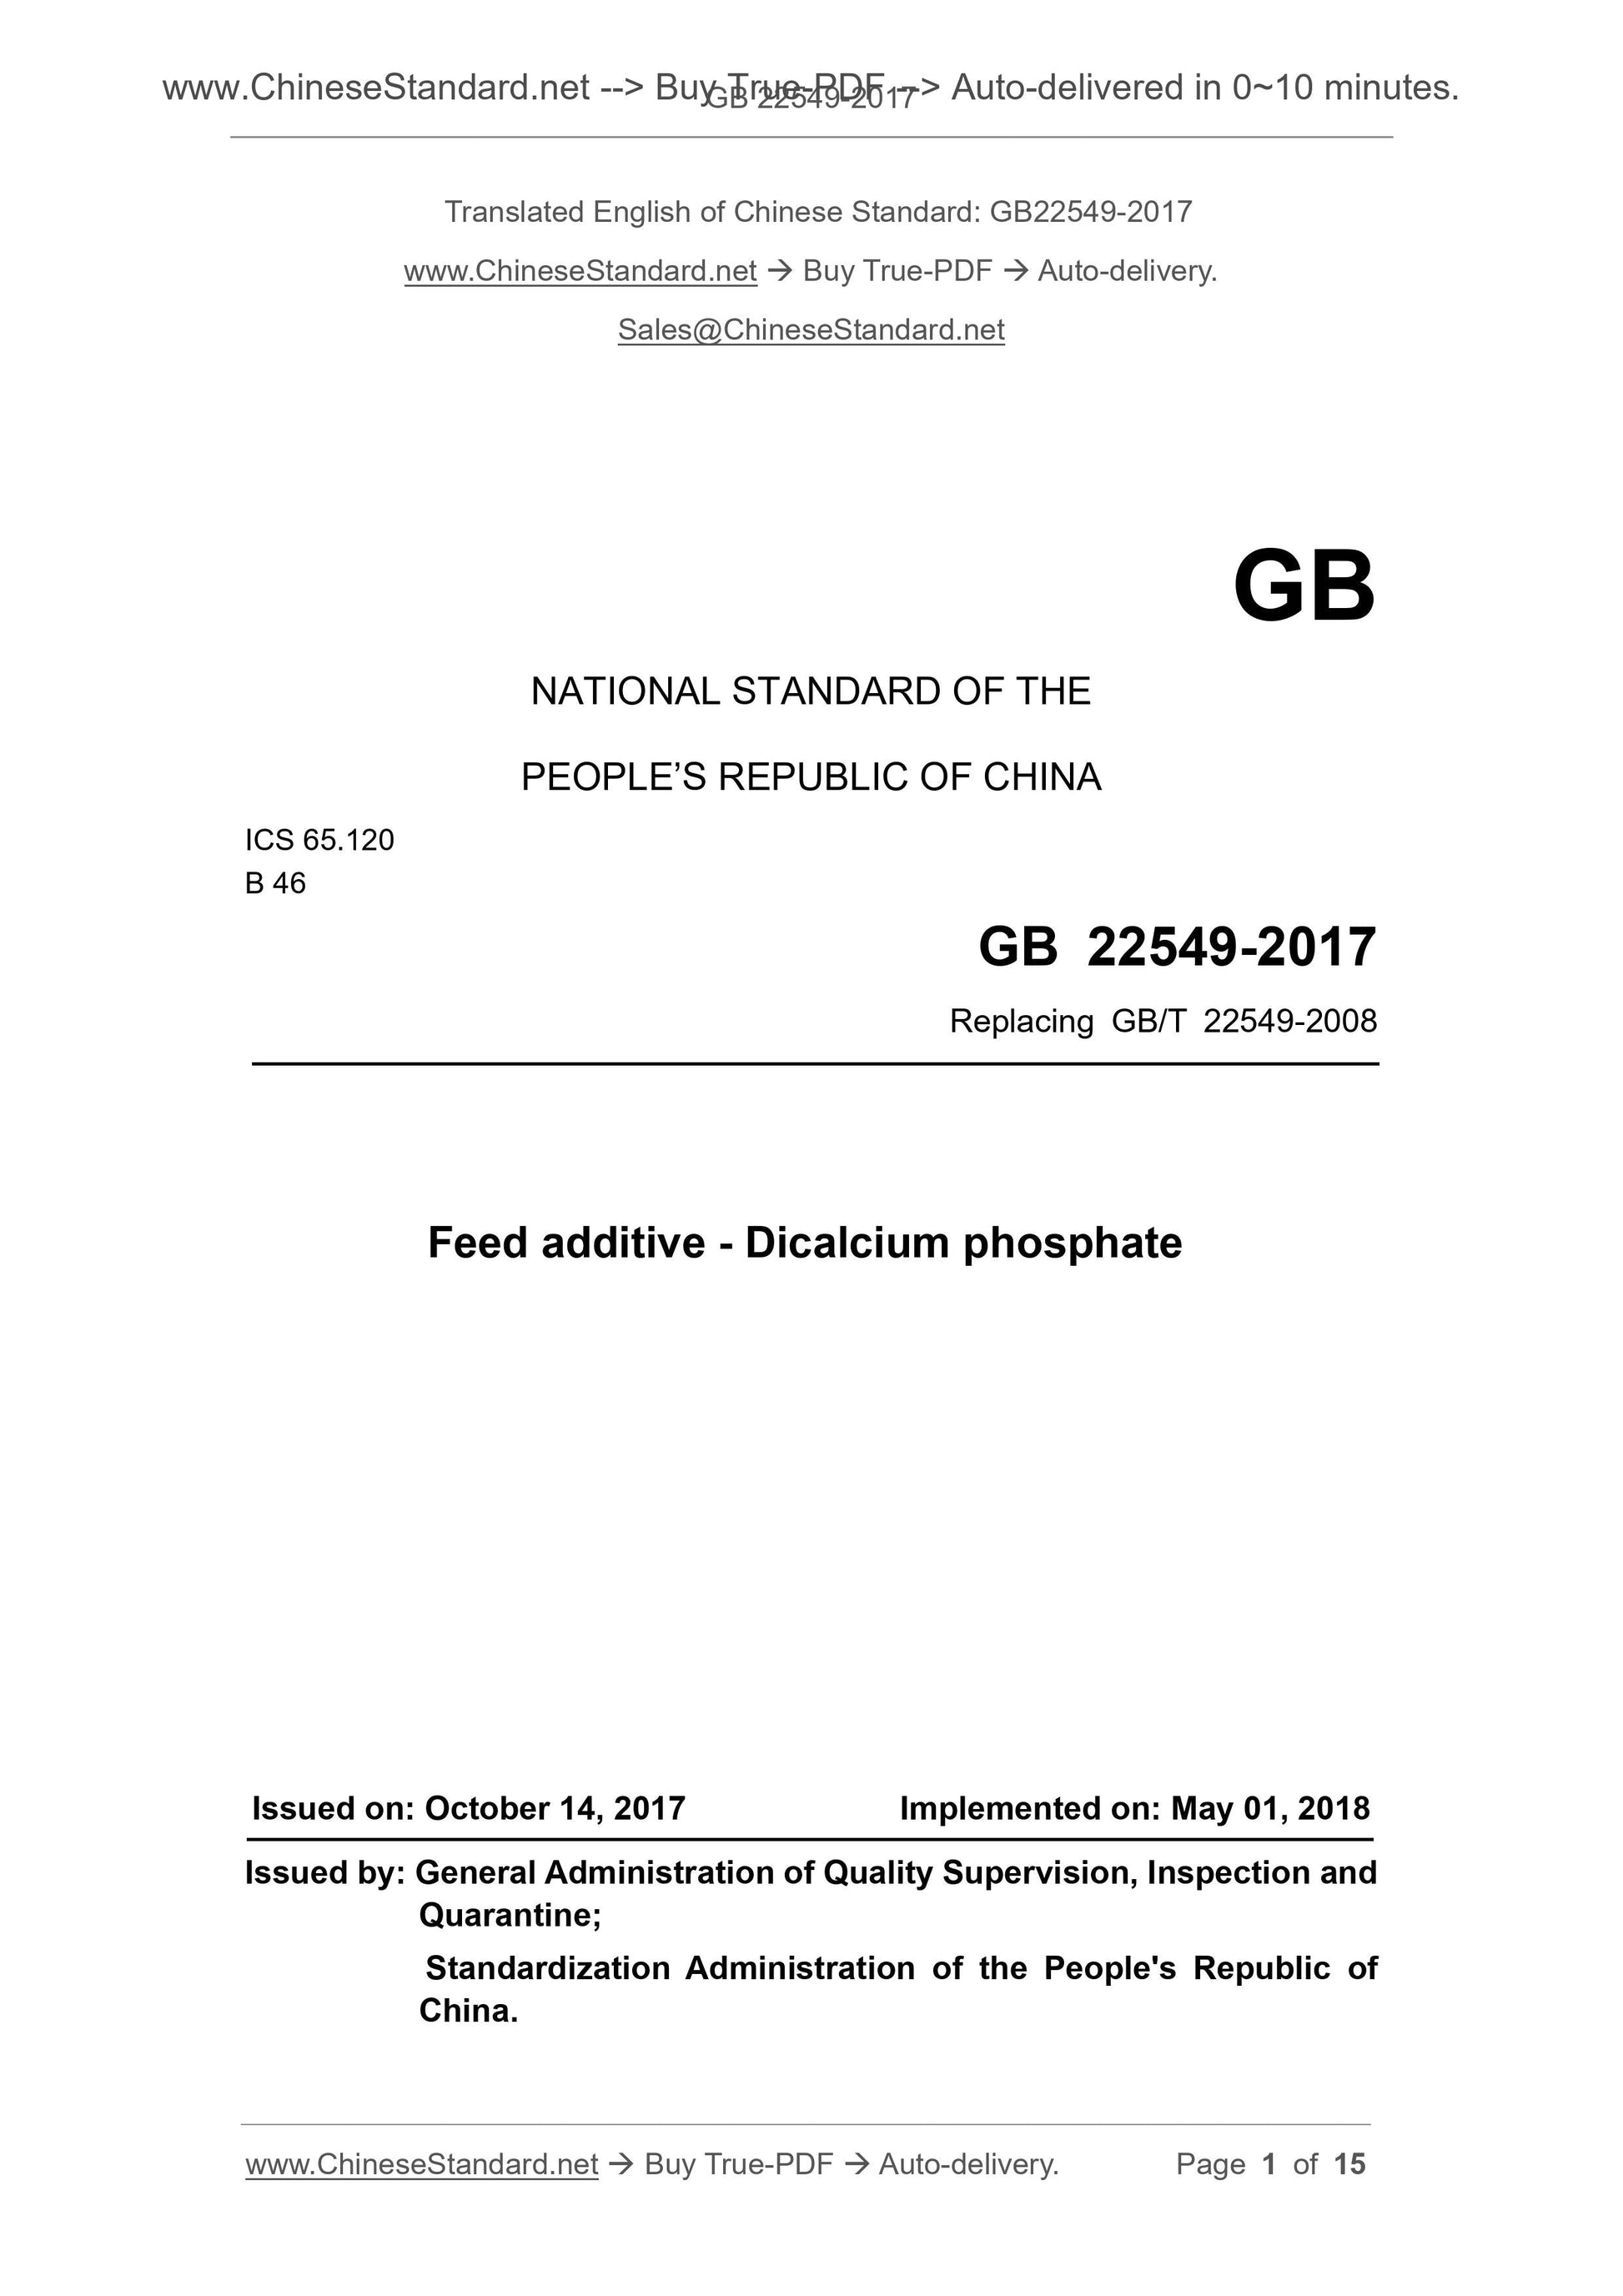 GB 22549-2017 Page 1